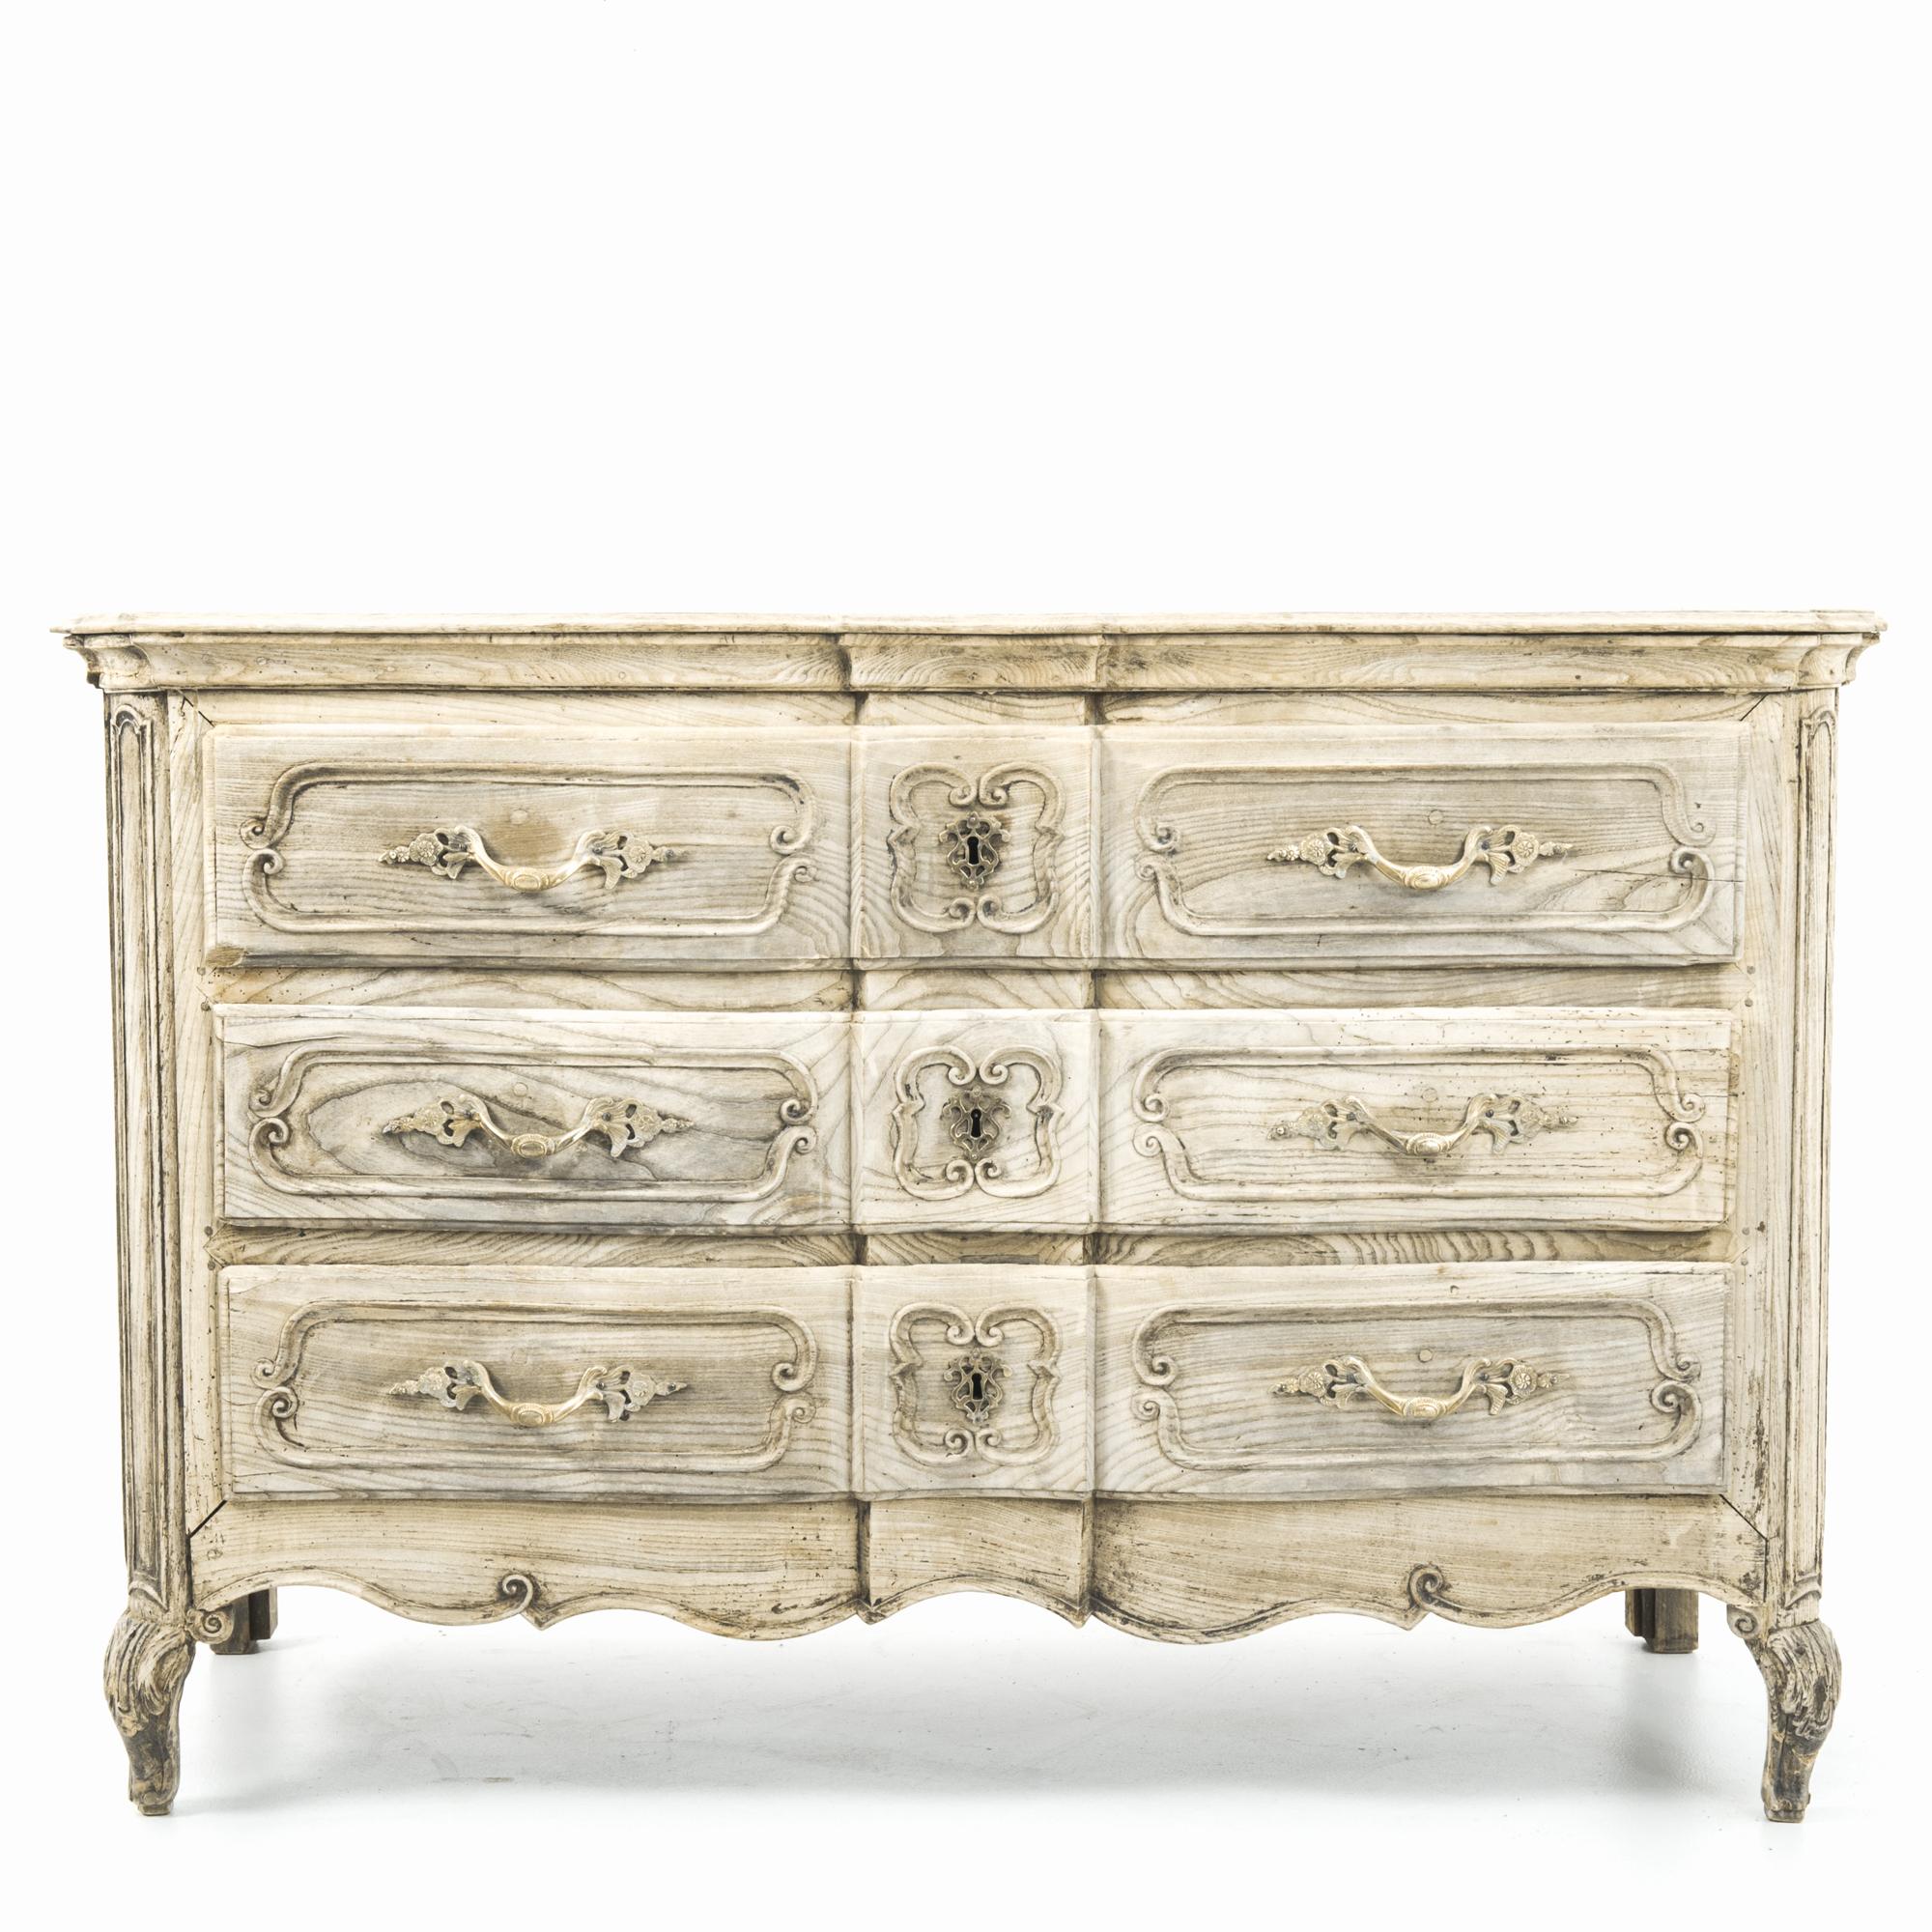 A three drawer oak chest from France, circa 1800. Distinctive period design is highlighted by the unique finish, the wood has been restored in our workshops to a light, natural color, complimenting the natural tones of the oak. A lively pattern of